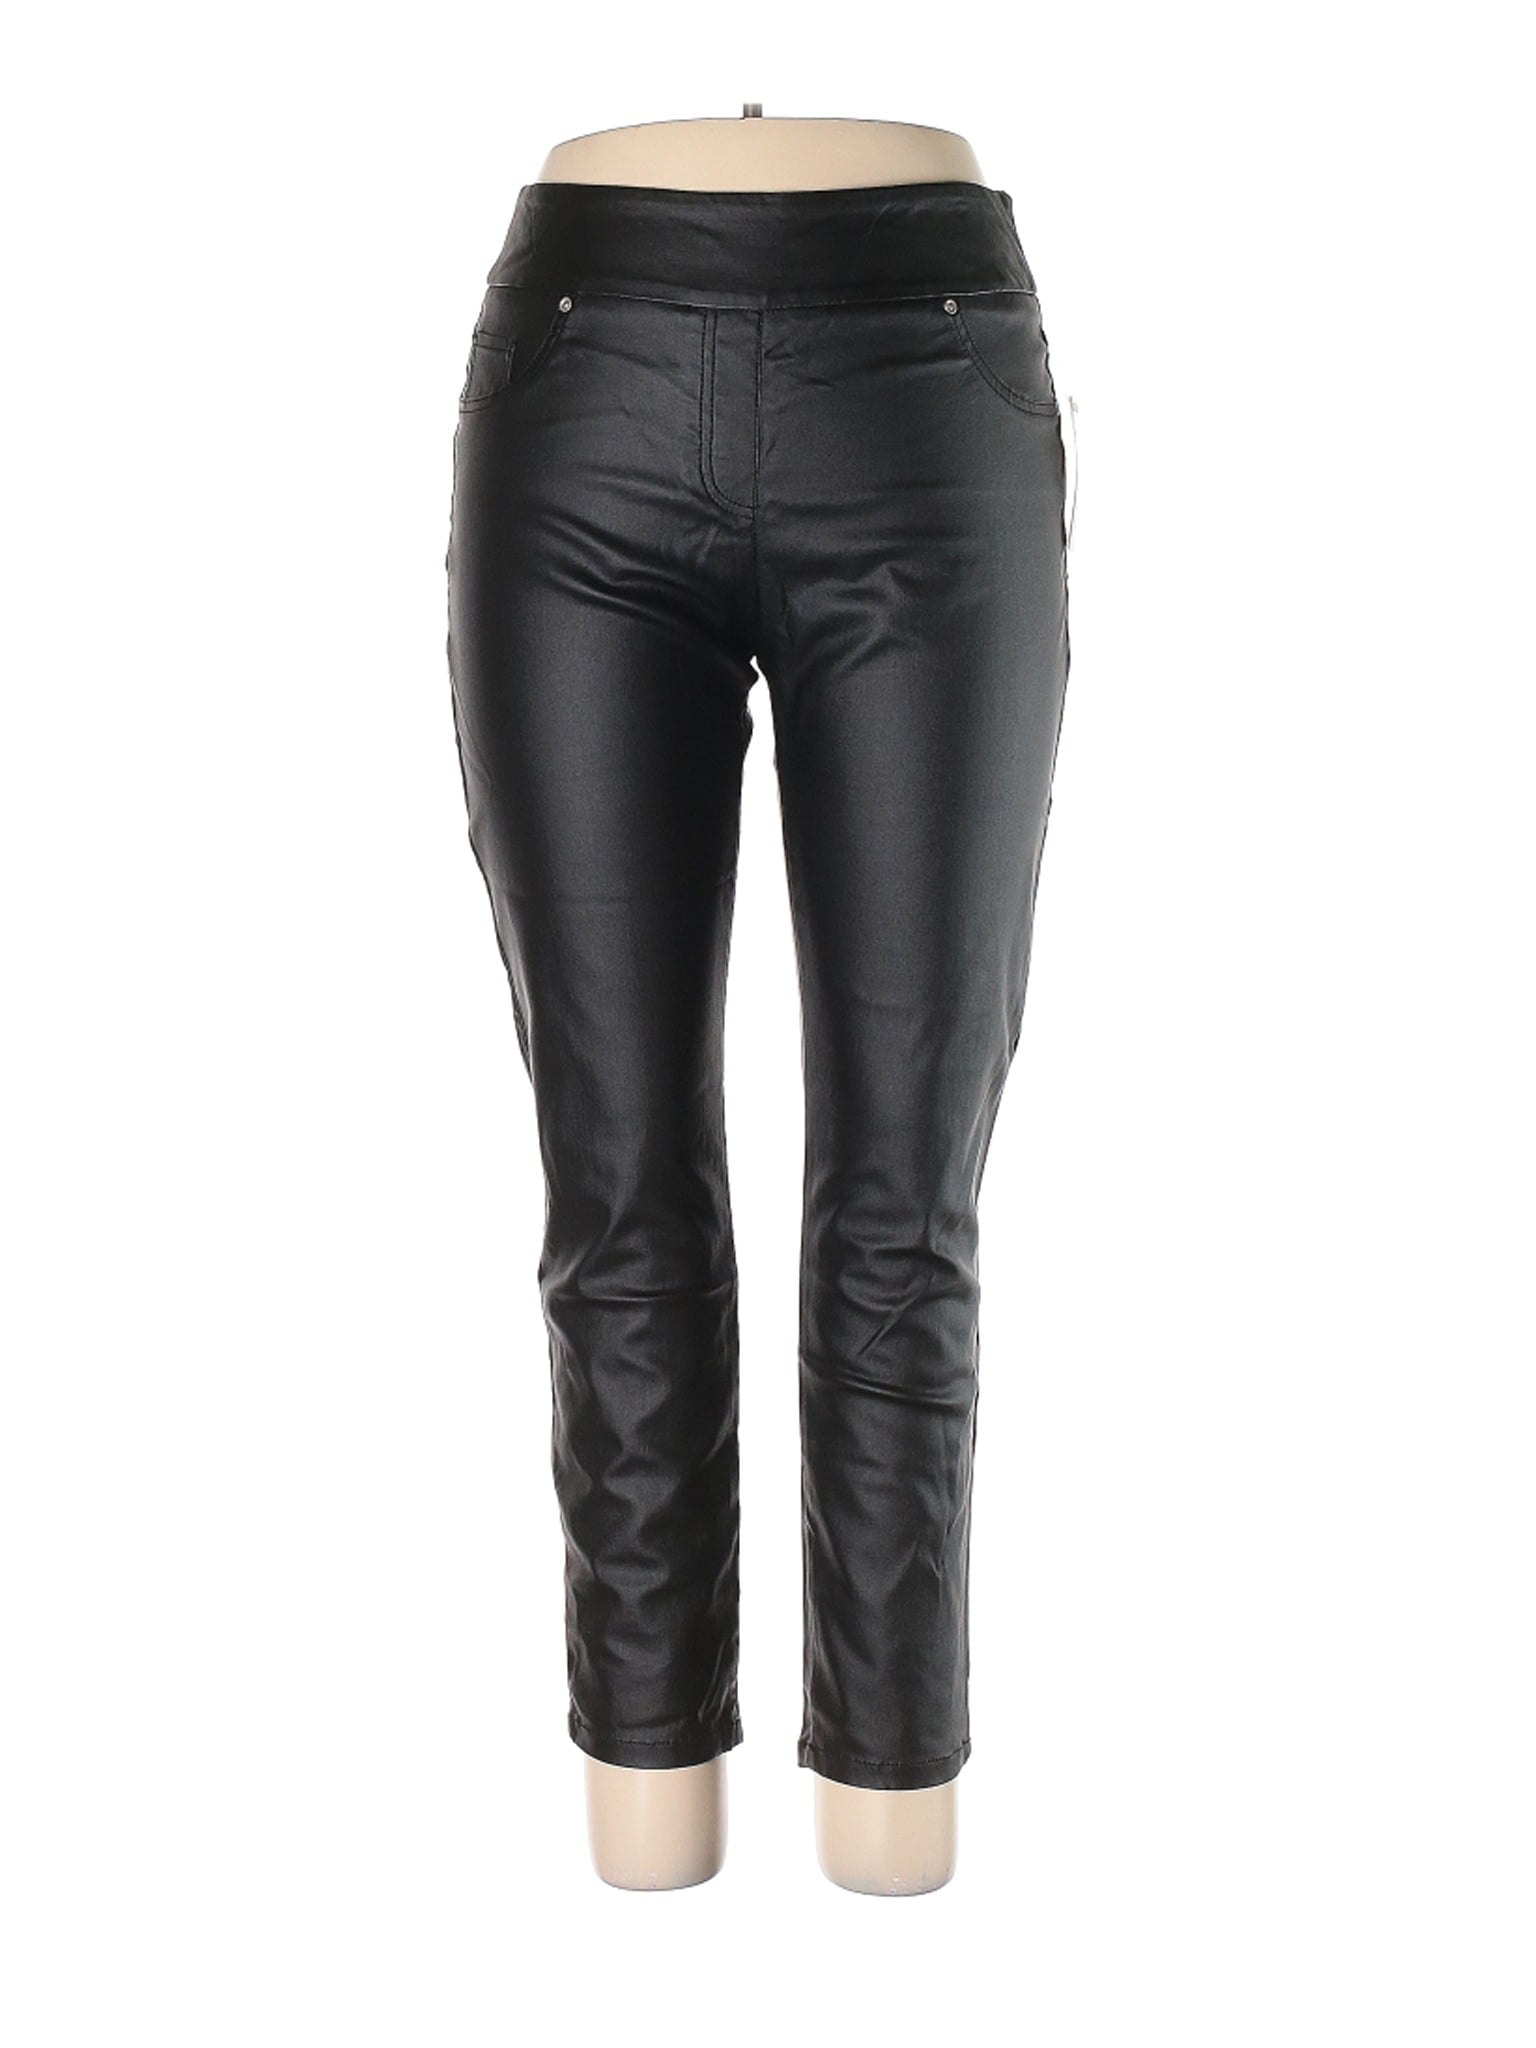 leather pants size 14